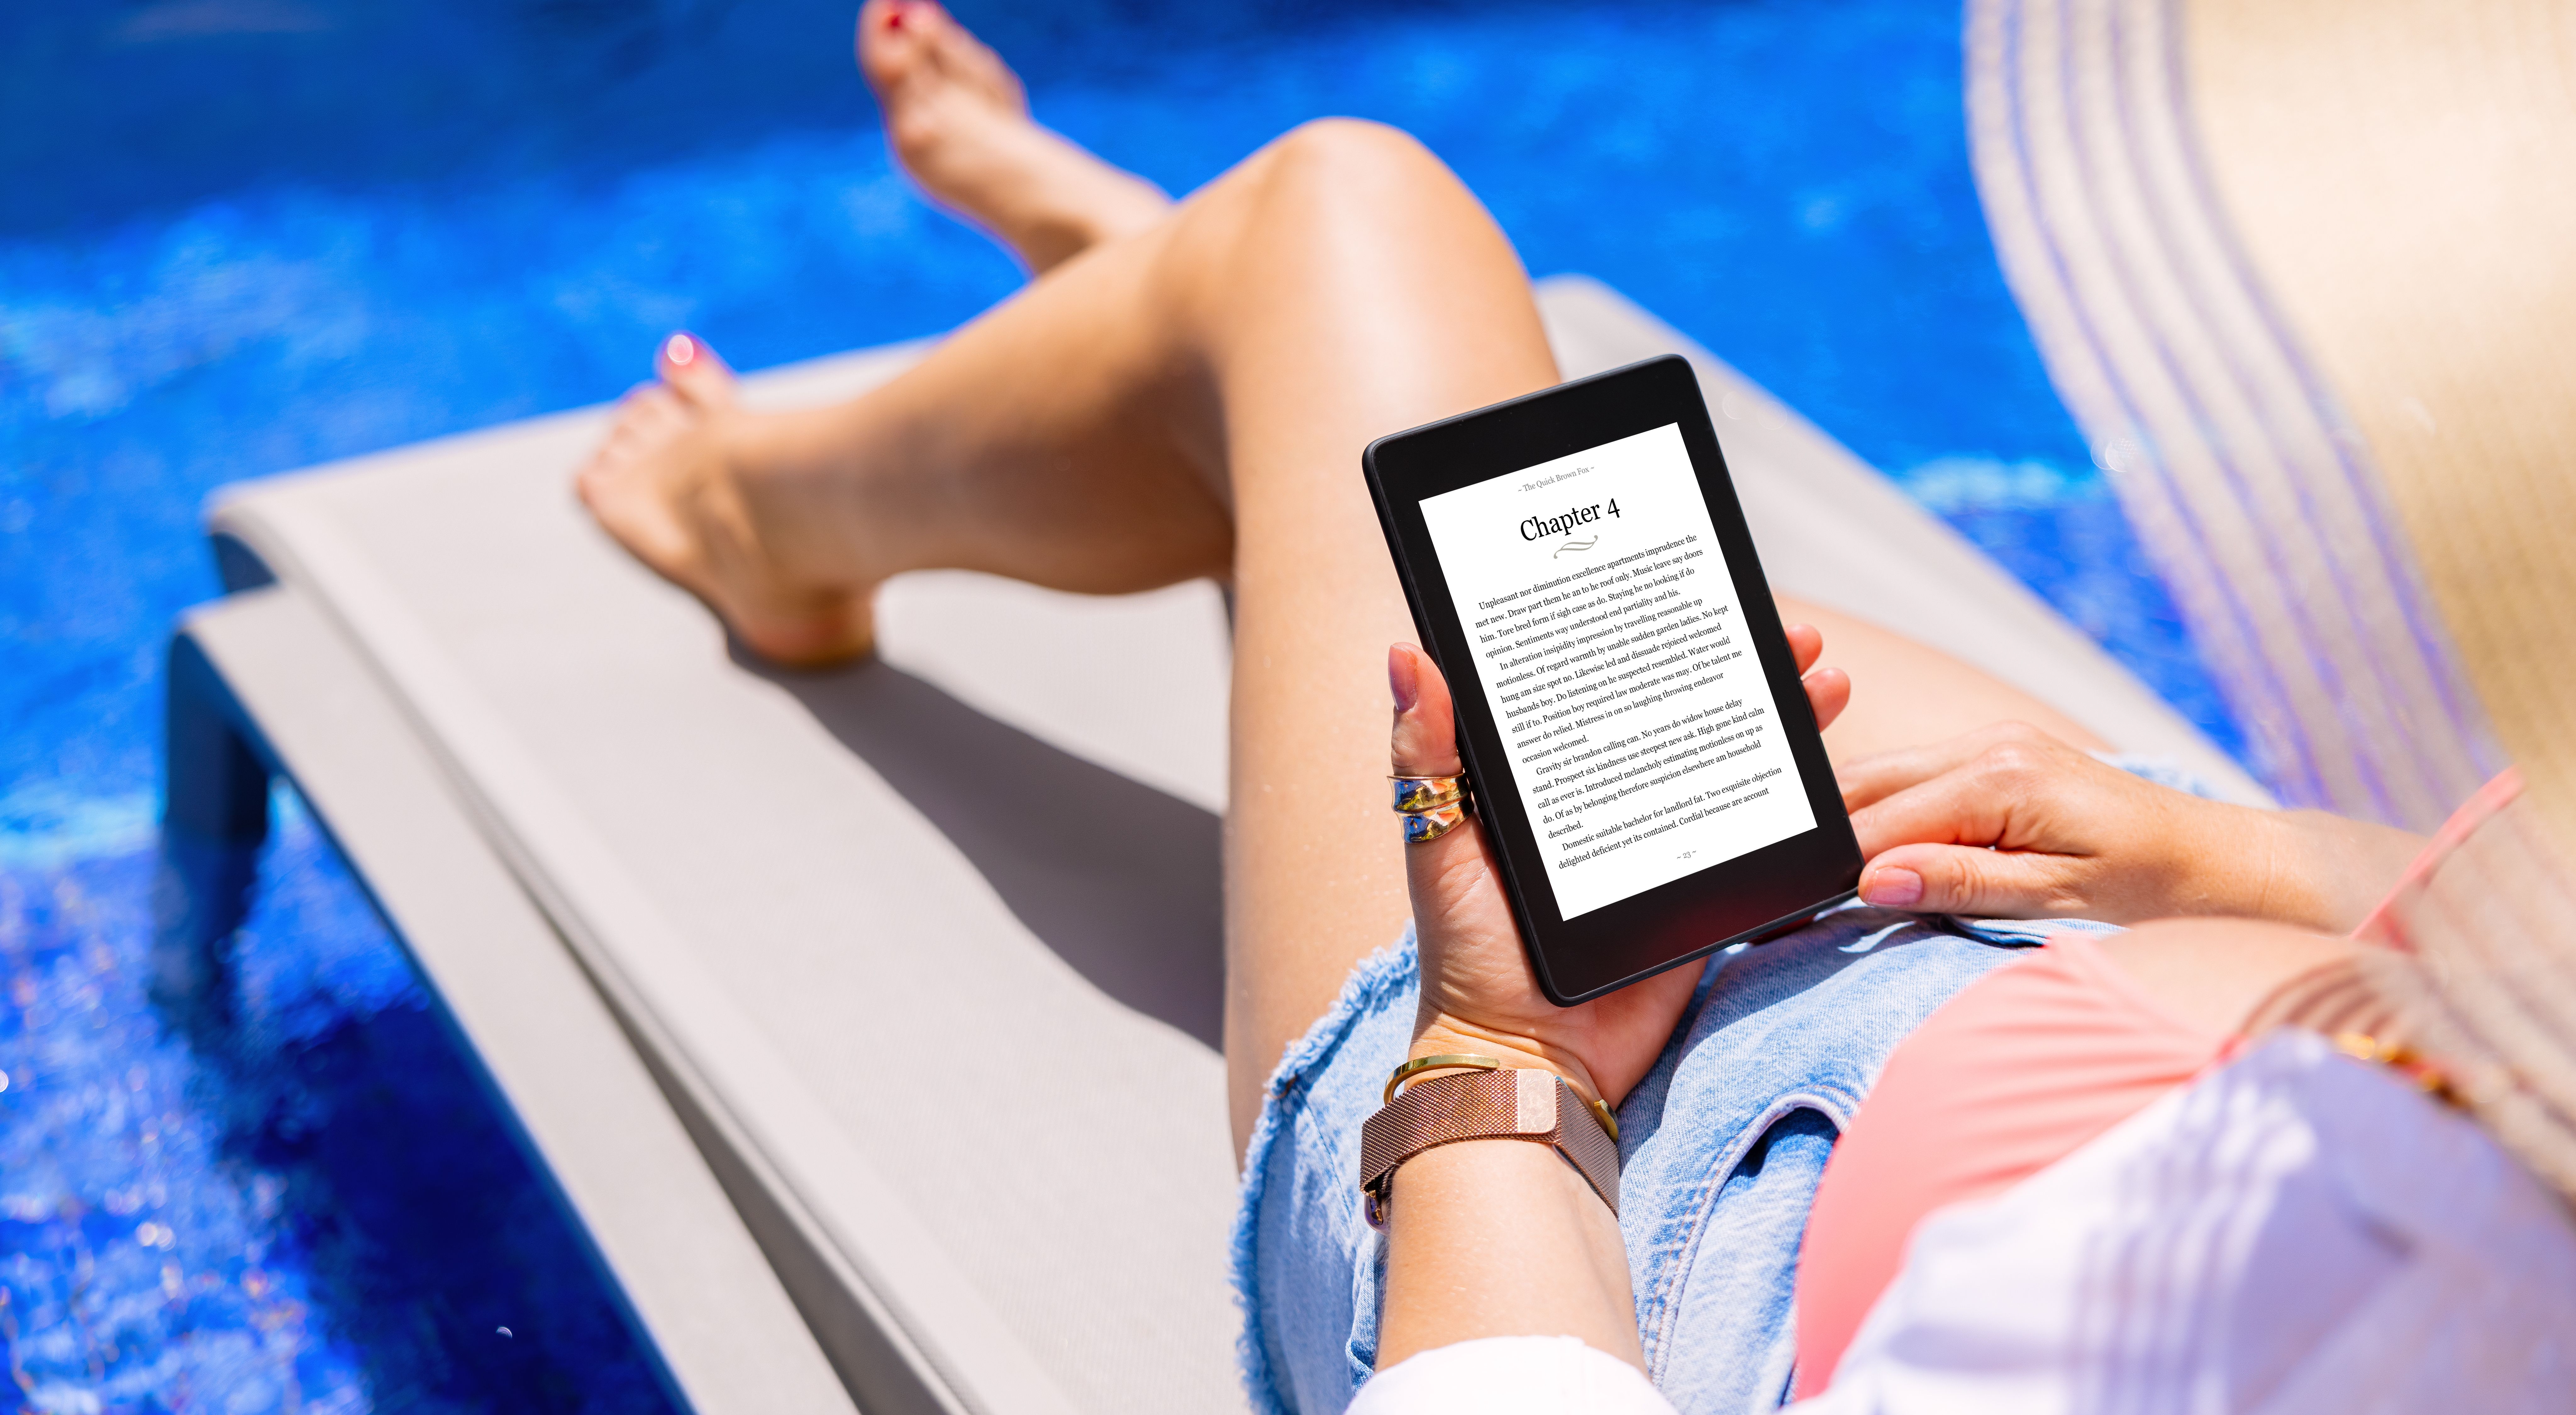 6 Reasons Why You Should Buy an E-Reader for School - Good e-Reader